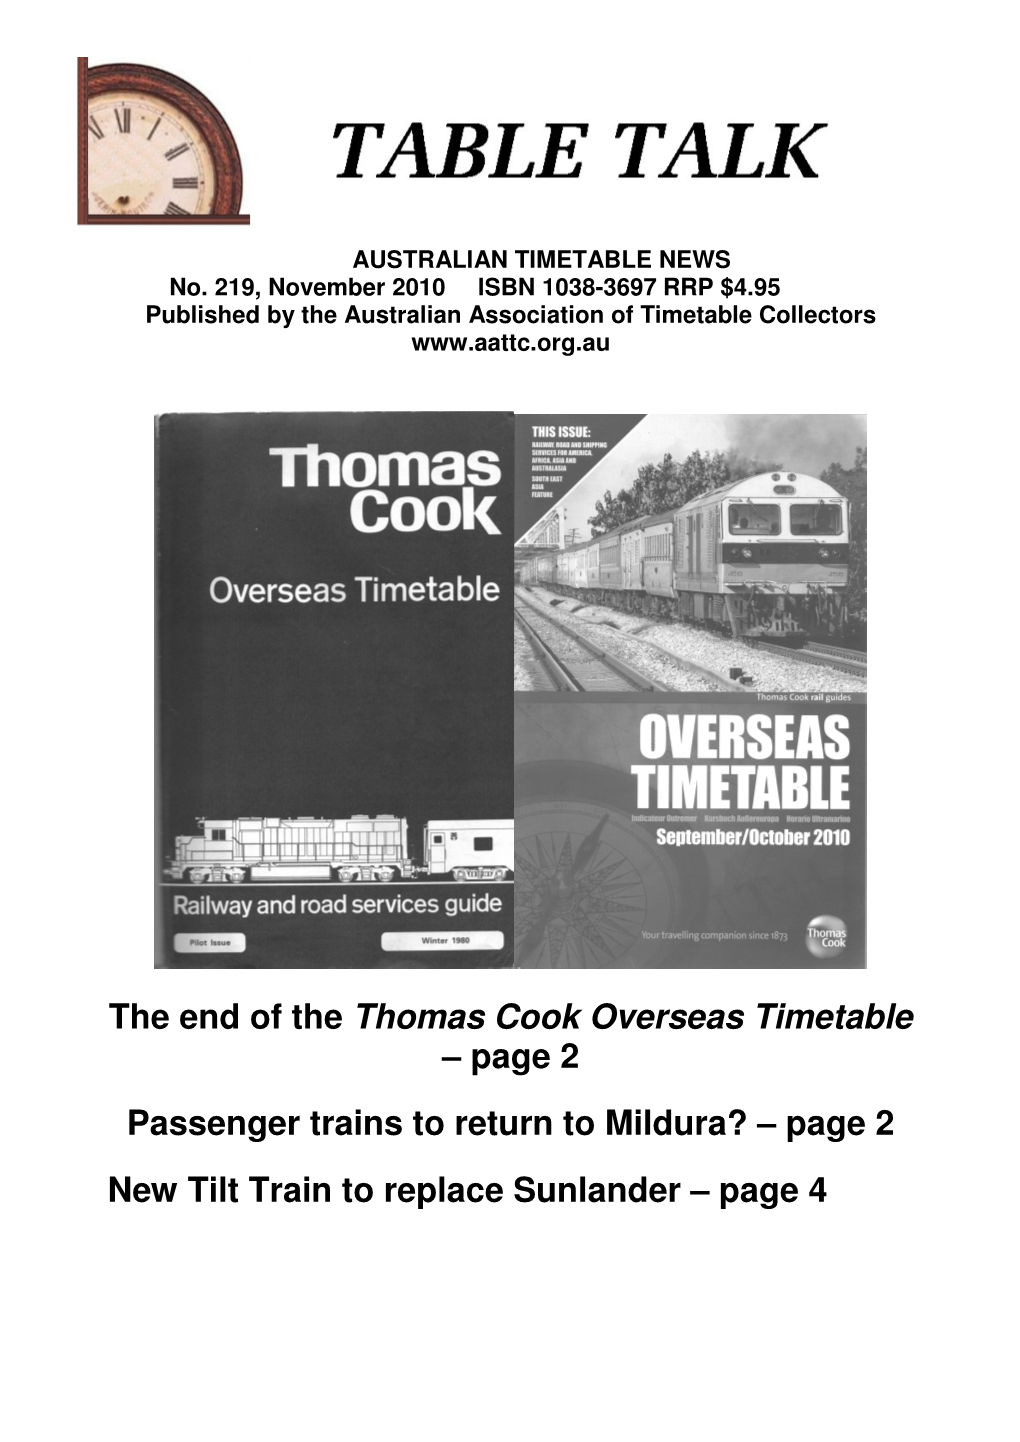 The End of the Thomas Cook Overseas Timetable – Page 2